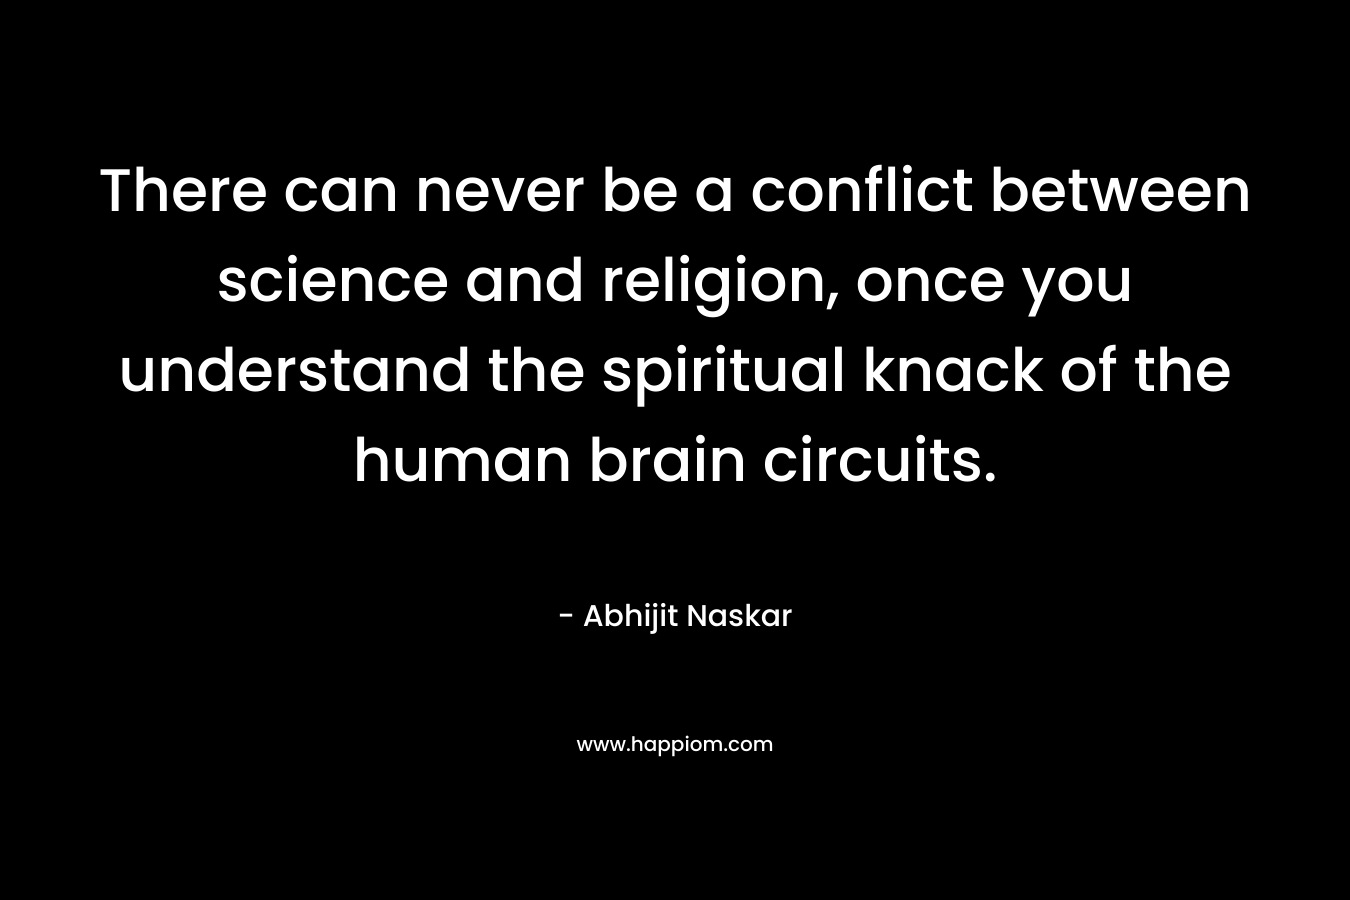 There can never be a conflict between science and religion, once you understand the spiritual knack of the human brain circuits.